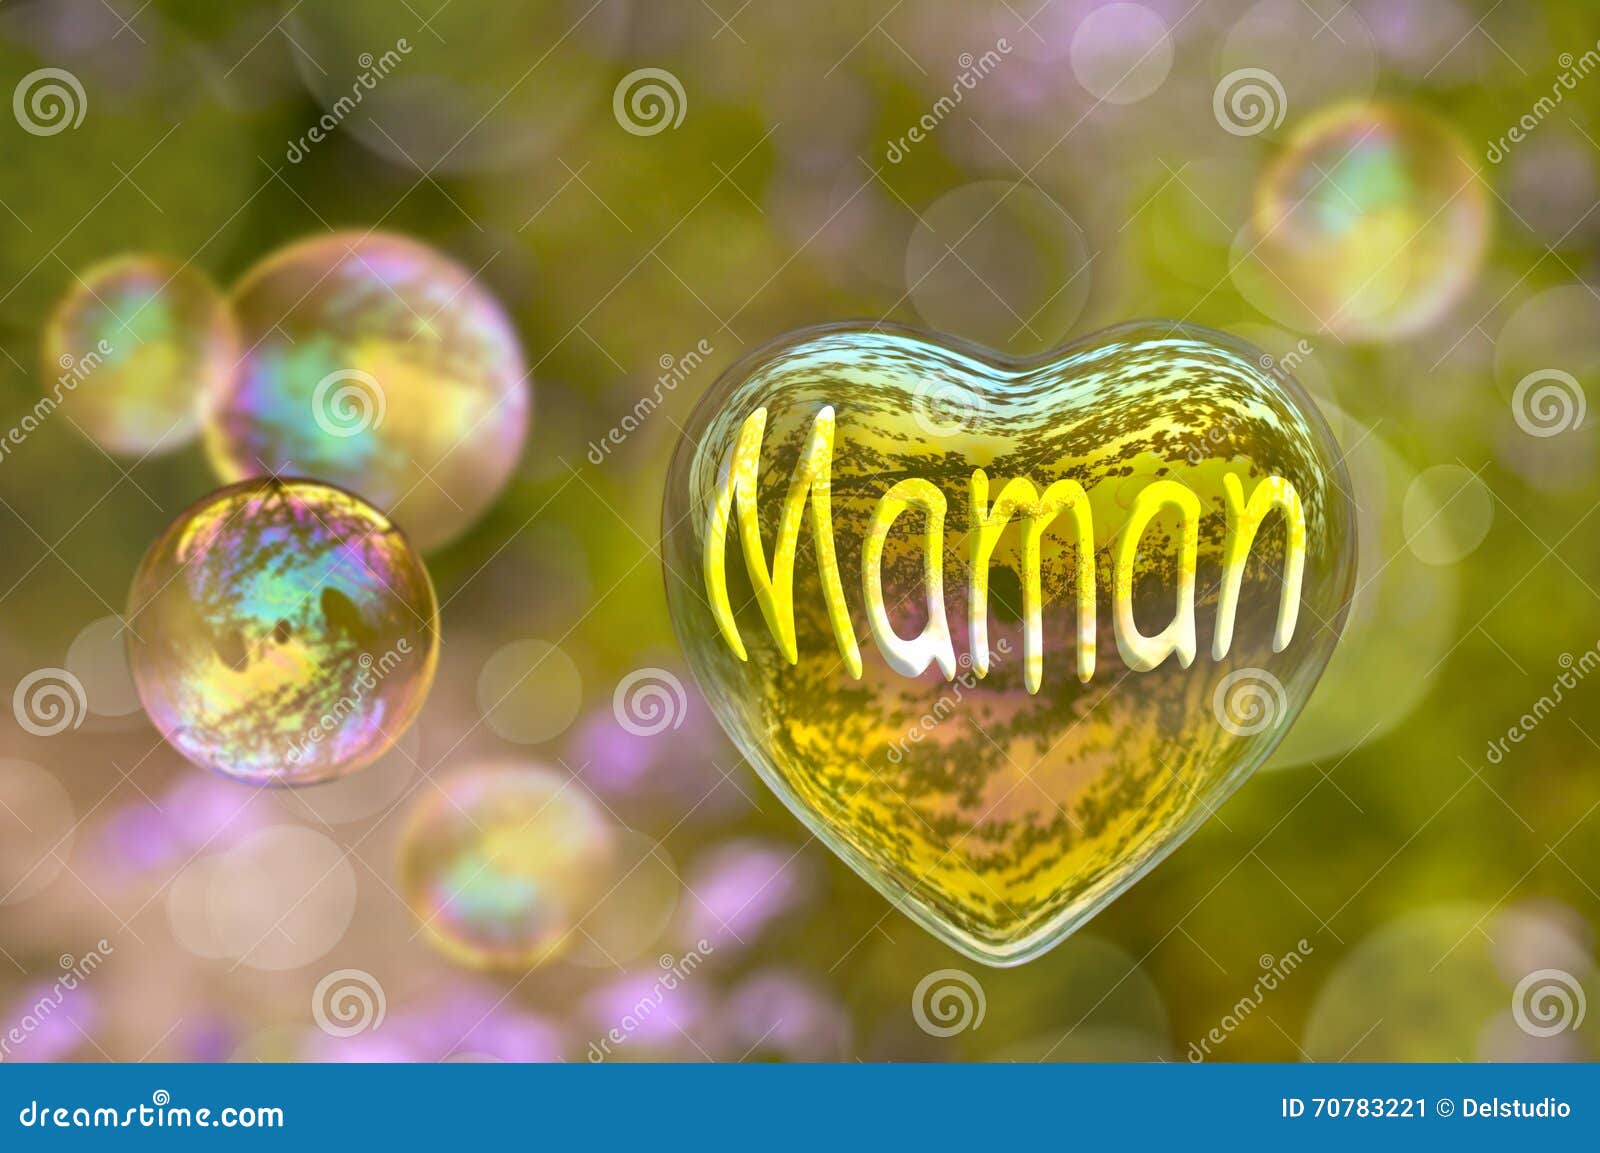 maman (meaning mom in french) written on a soap bubble in the  of heart